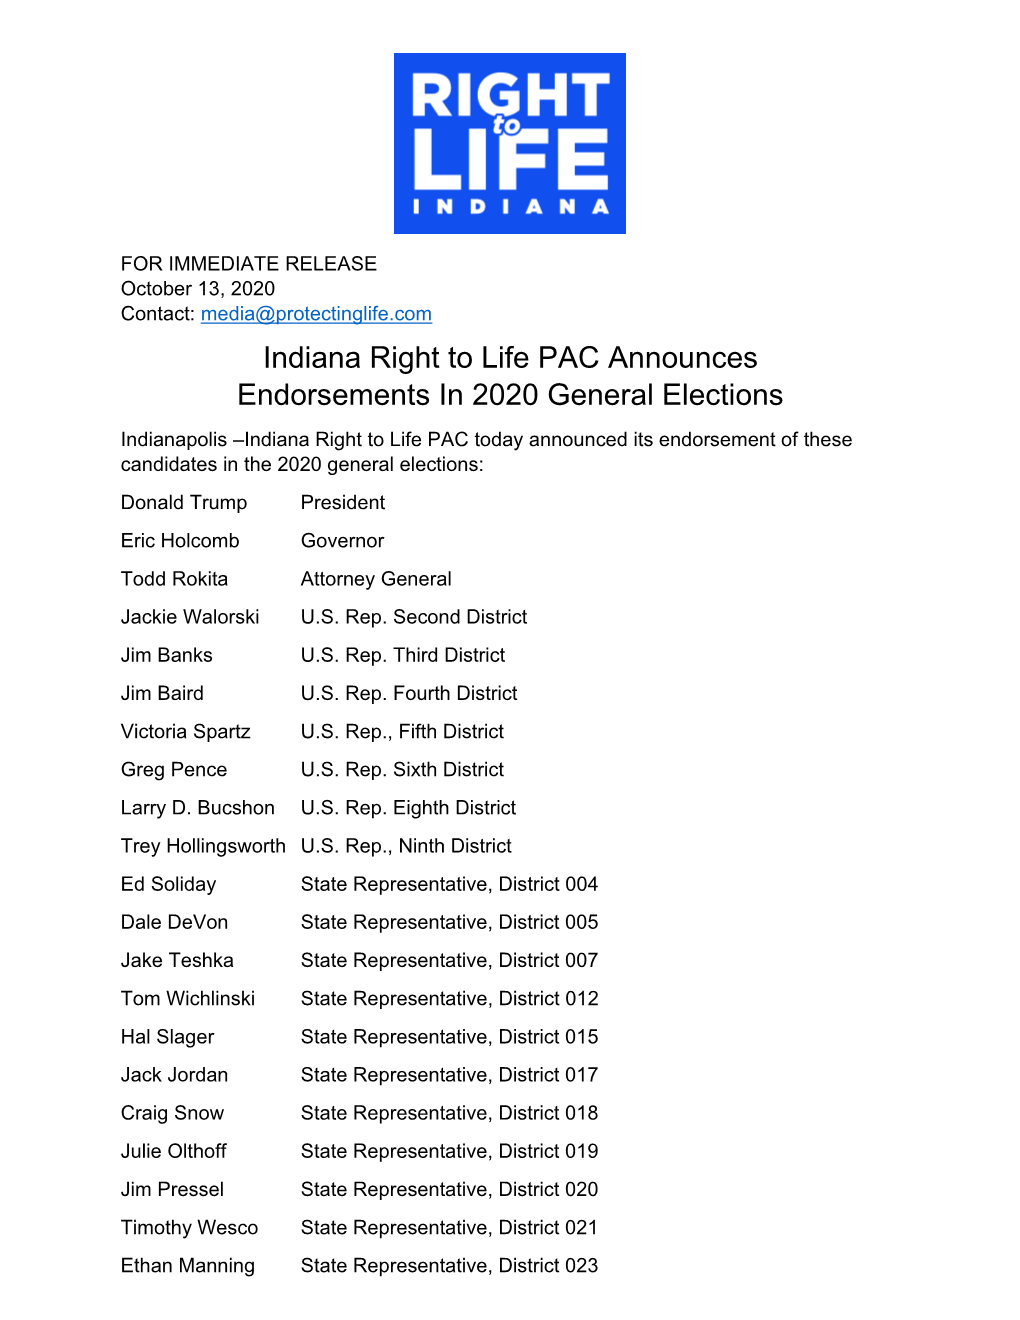 Indiana Right to Life PAC Announces Endorsements in 2020 General